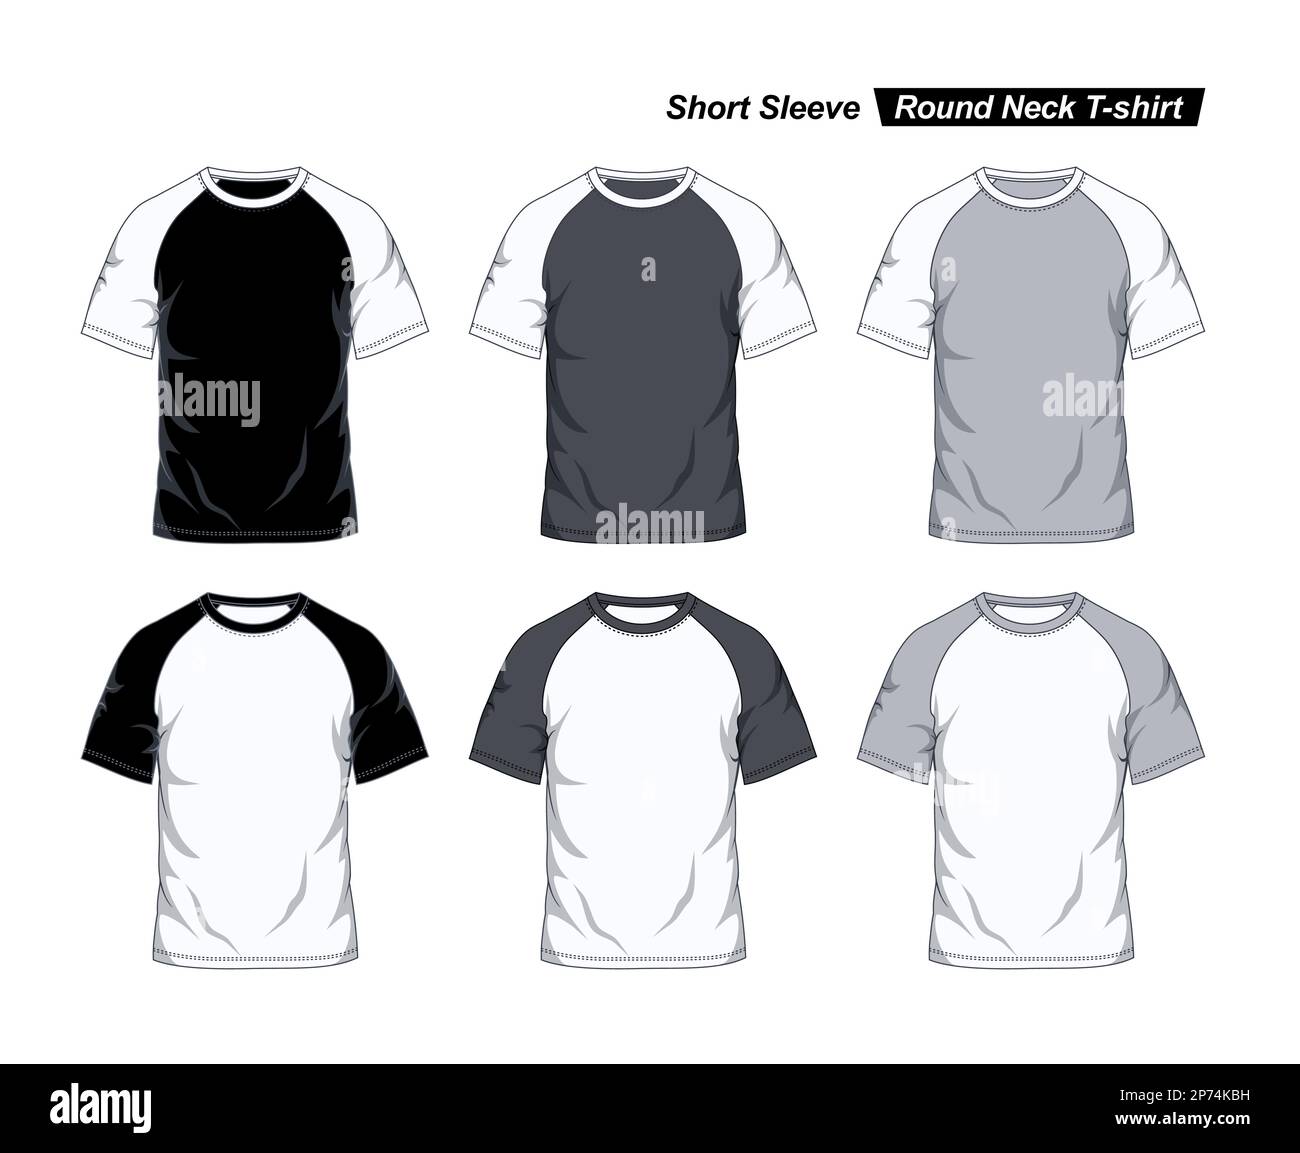 Short sleeve round neck raglan t-shirt template, front view, black and ...